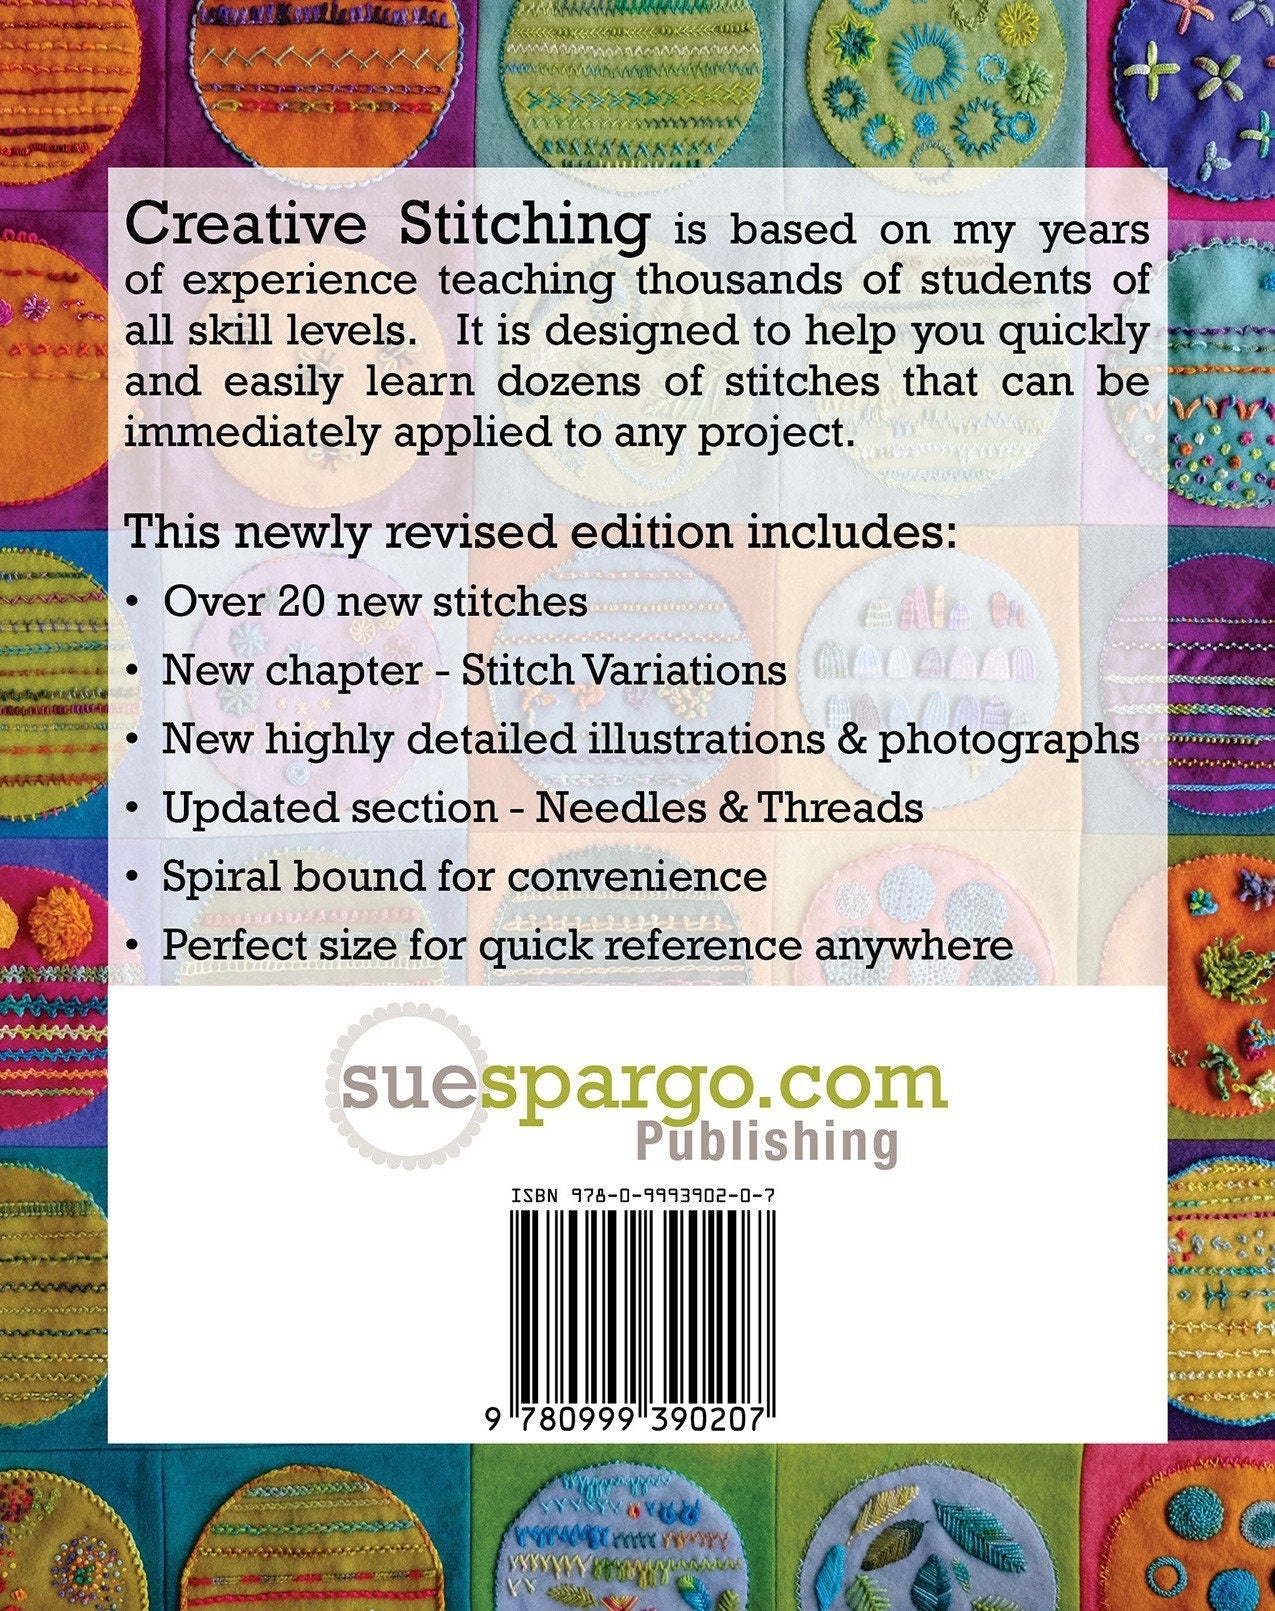 Creative Stitching Second Edition Hand Embroidery Book by Sue Spargo of Folk Art Quilts